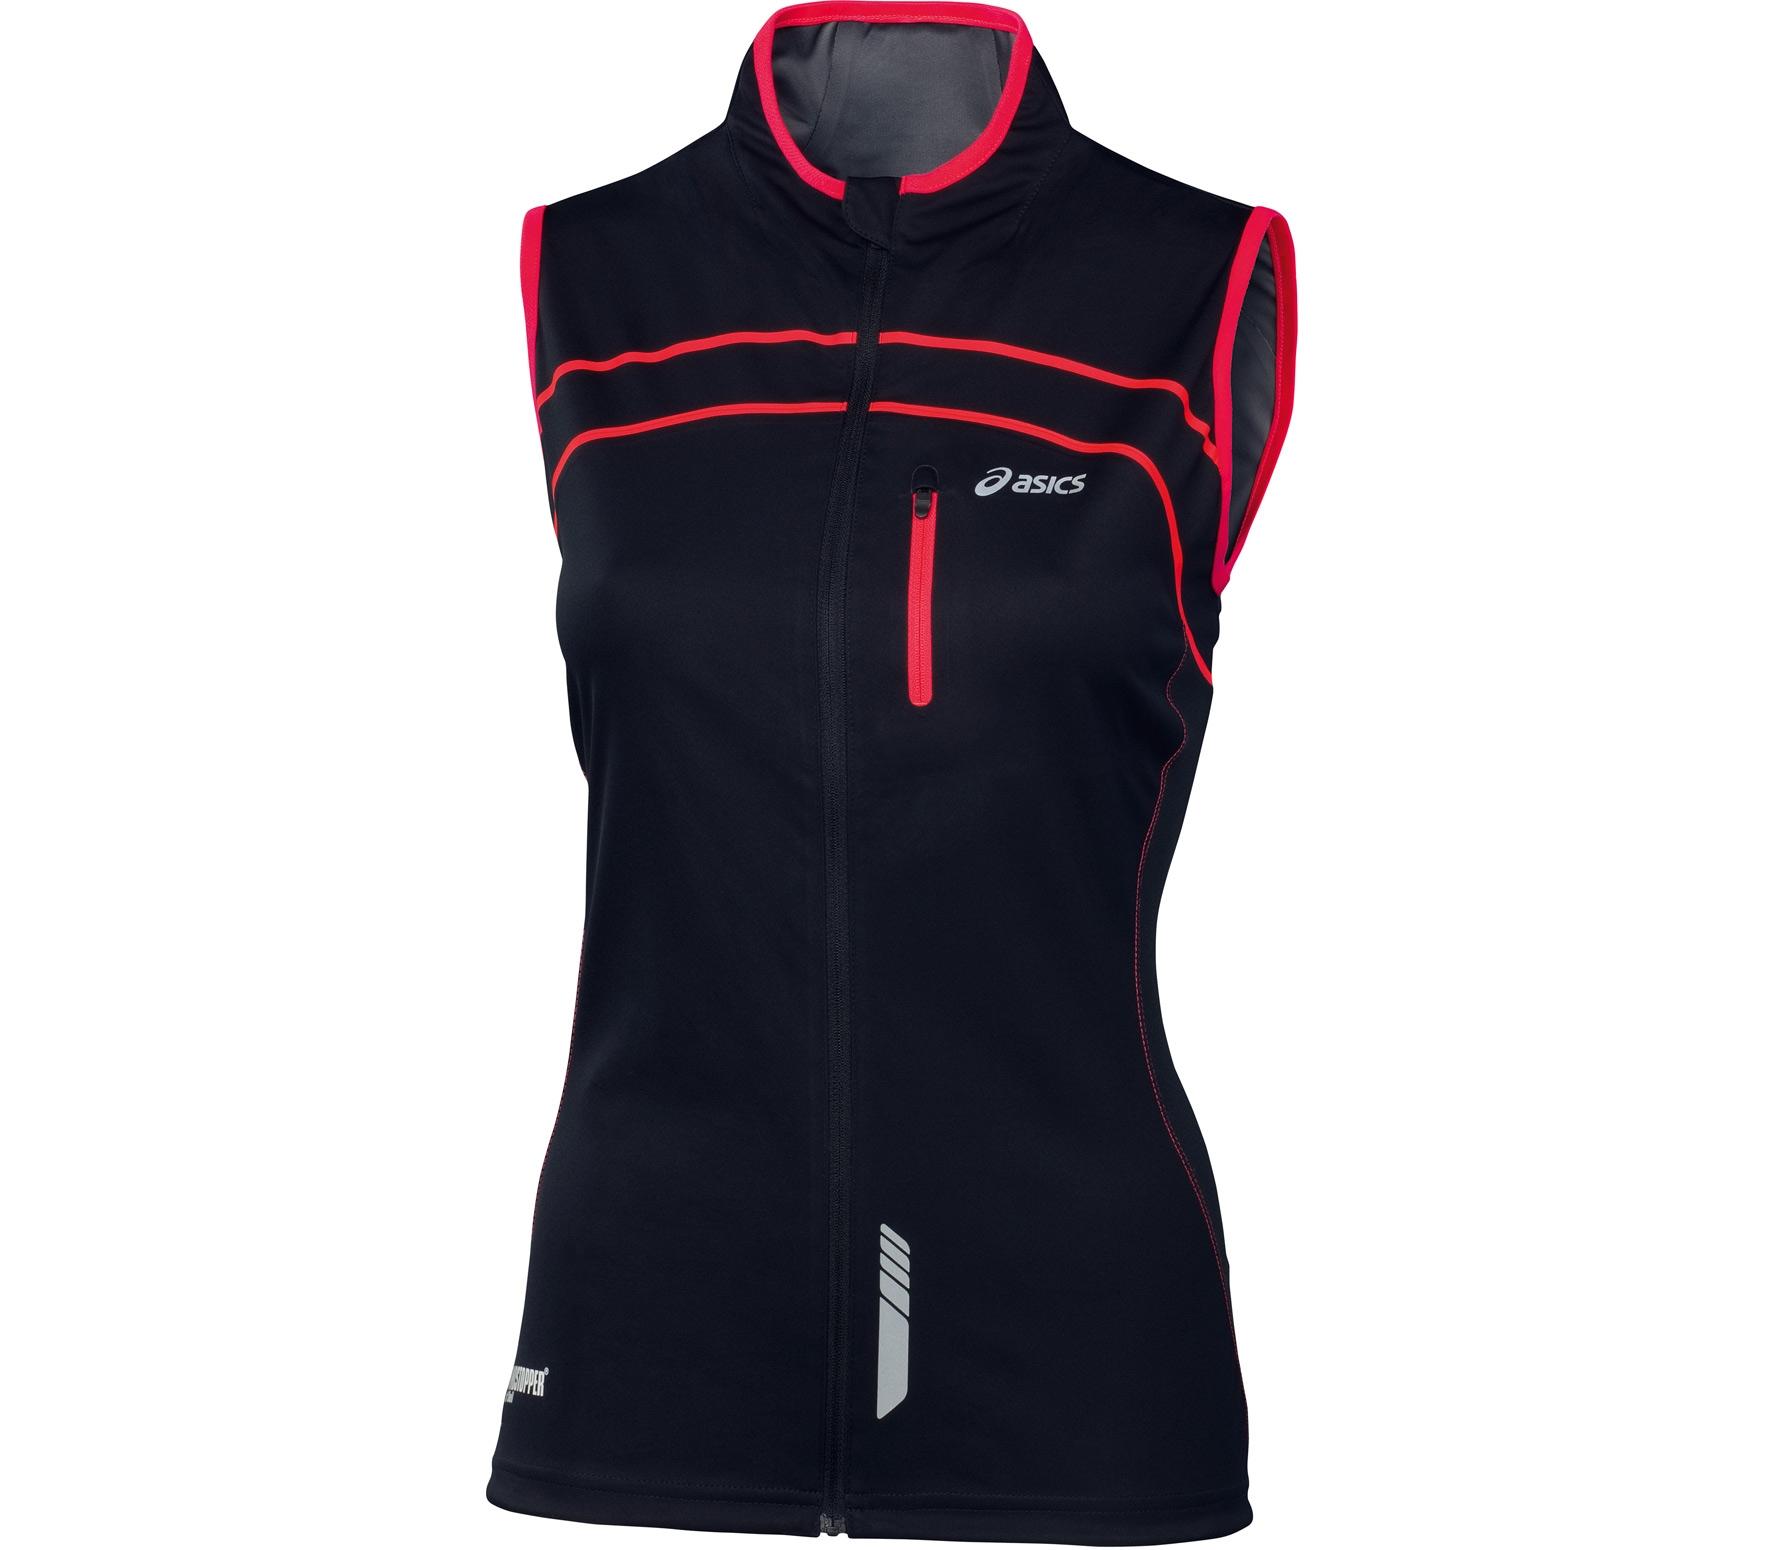 Foto Asics - Chaleco Running Mujer Gore Gillet - FS13